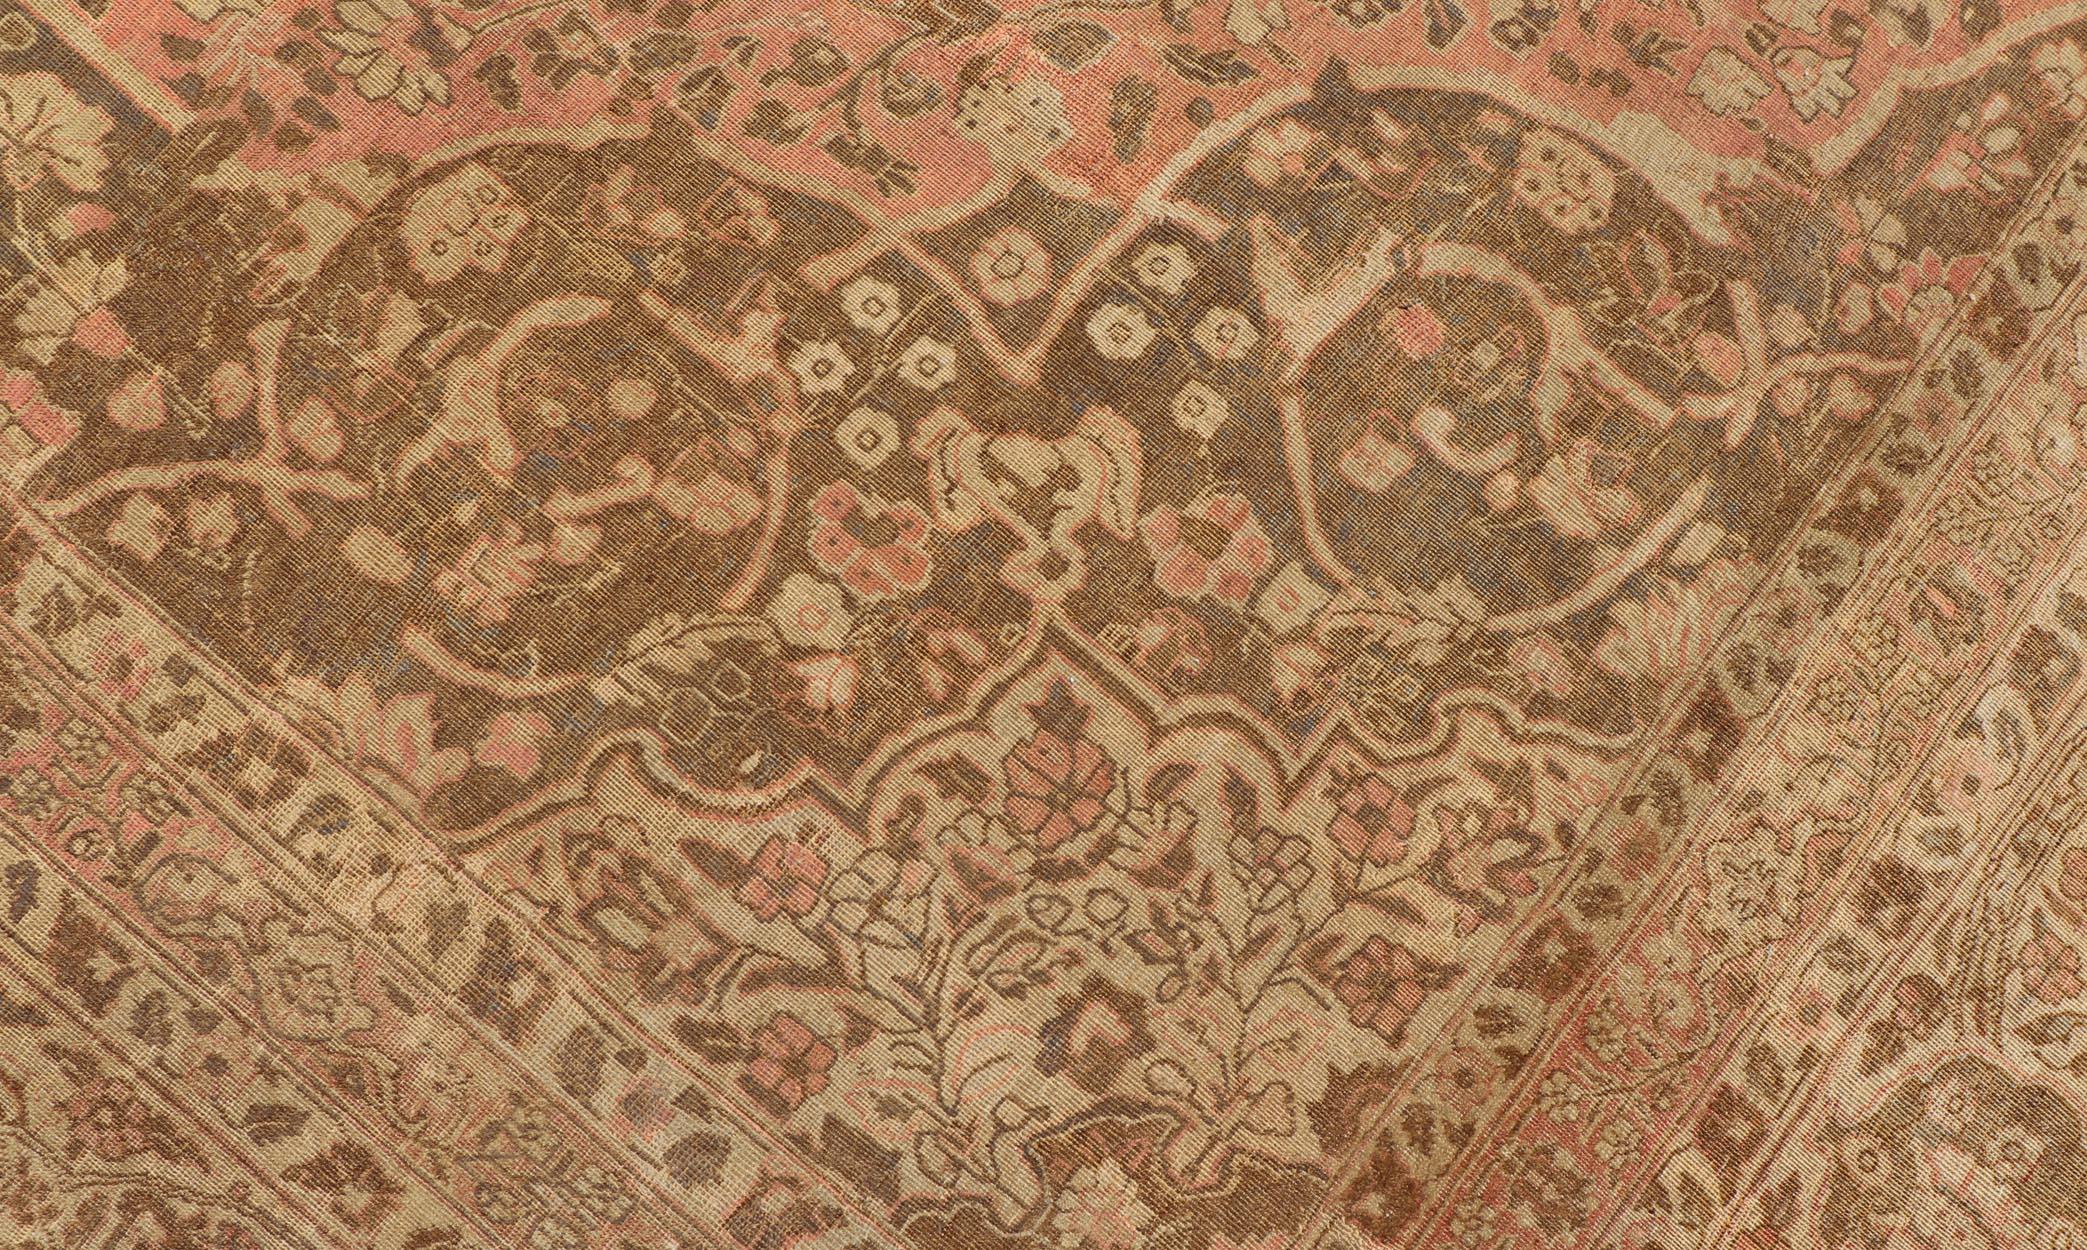 Antique Medallion Tabriz Carpet in Pink, Light Brown, Camel, Taupe, and Salmon For Sale 2